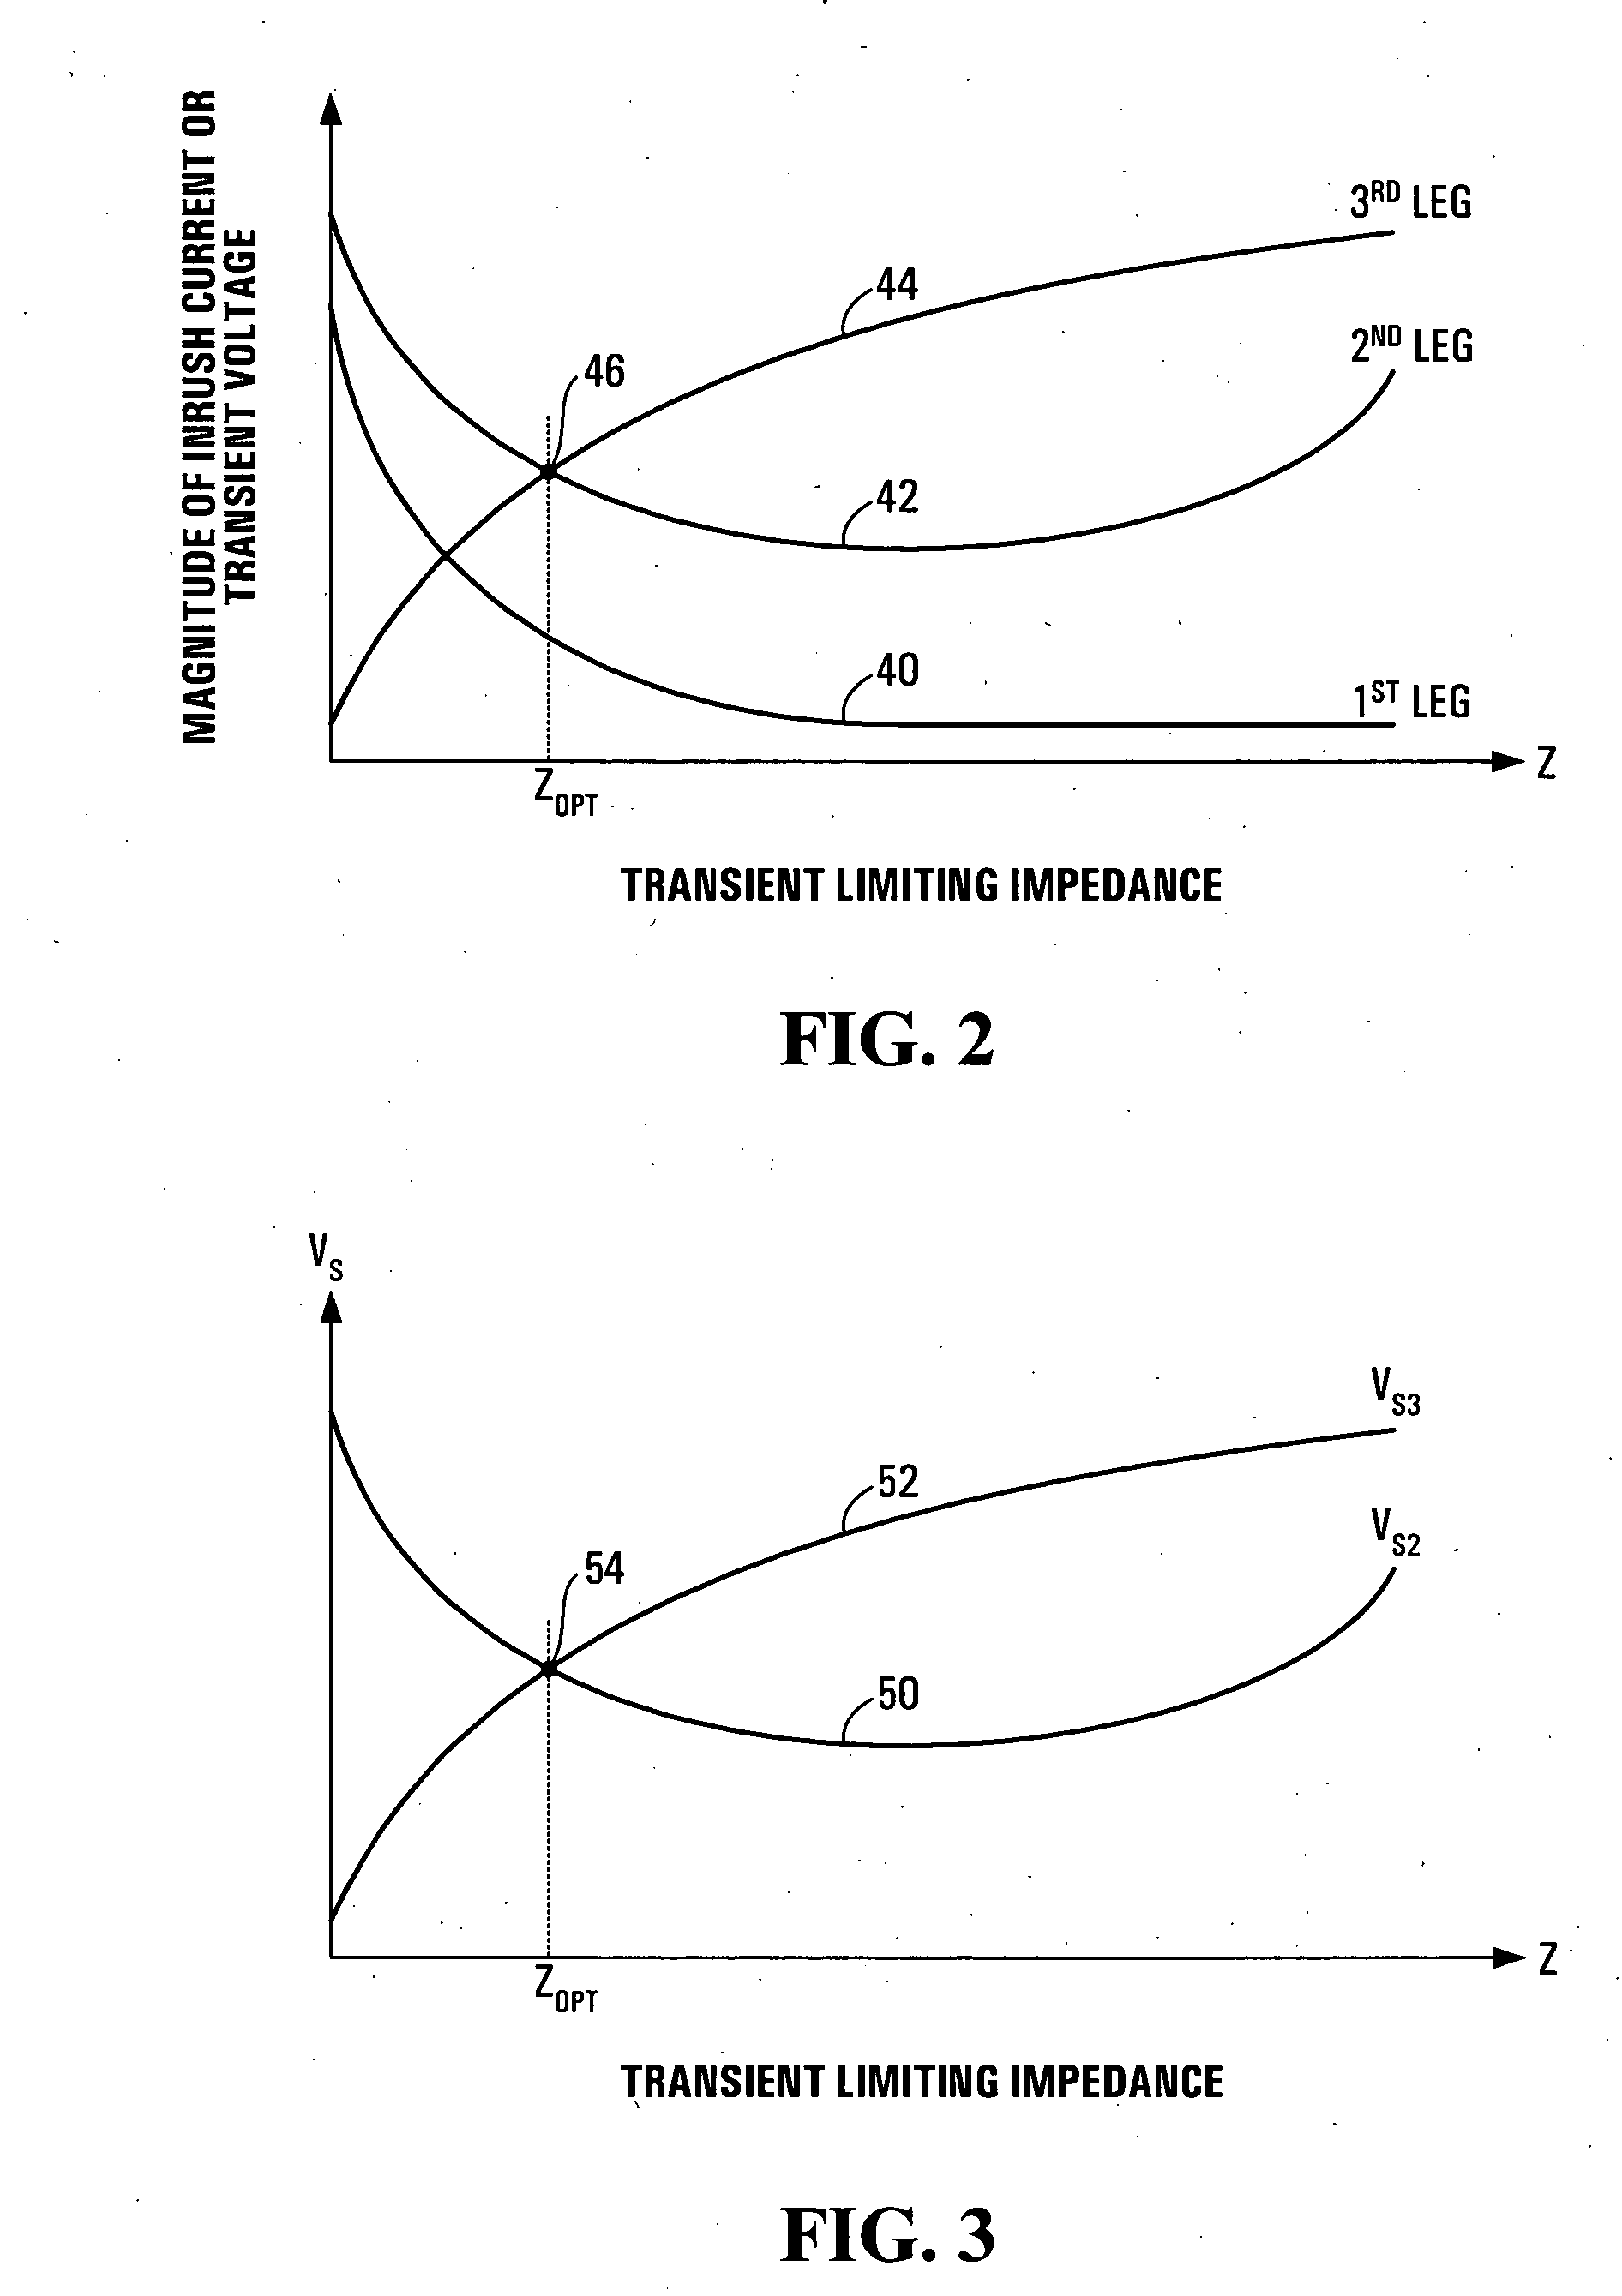 Reduction of energization transients in a three phase Y-connected load